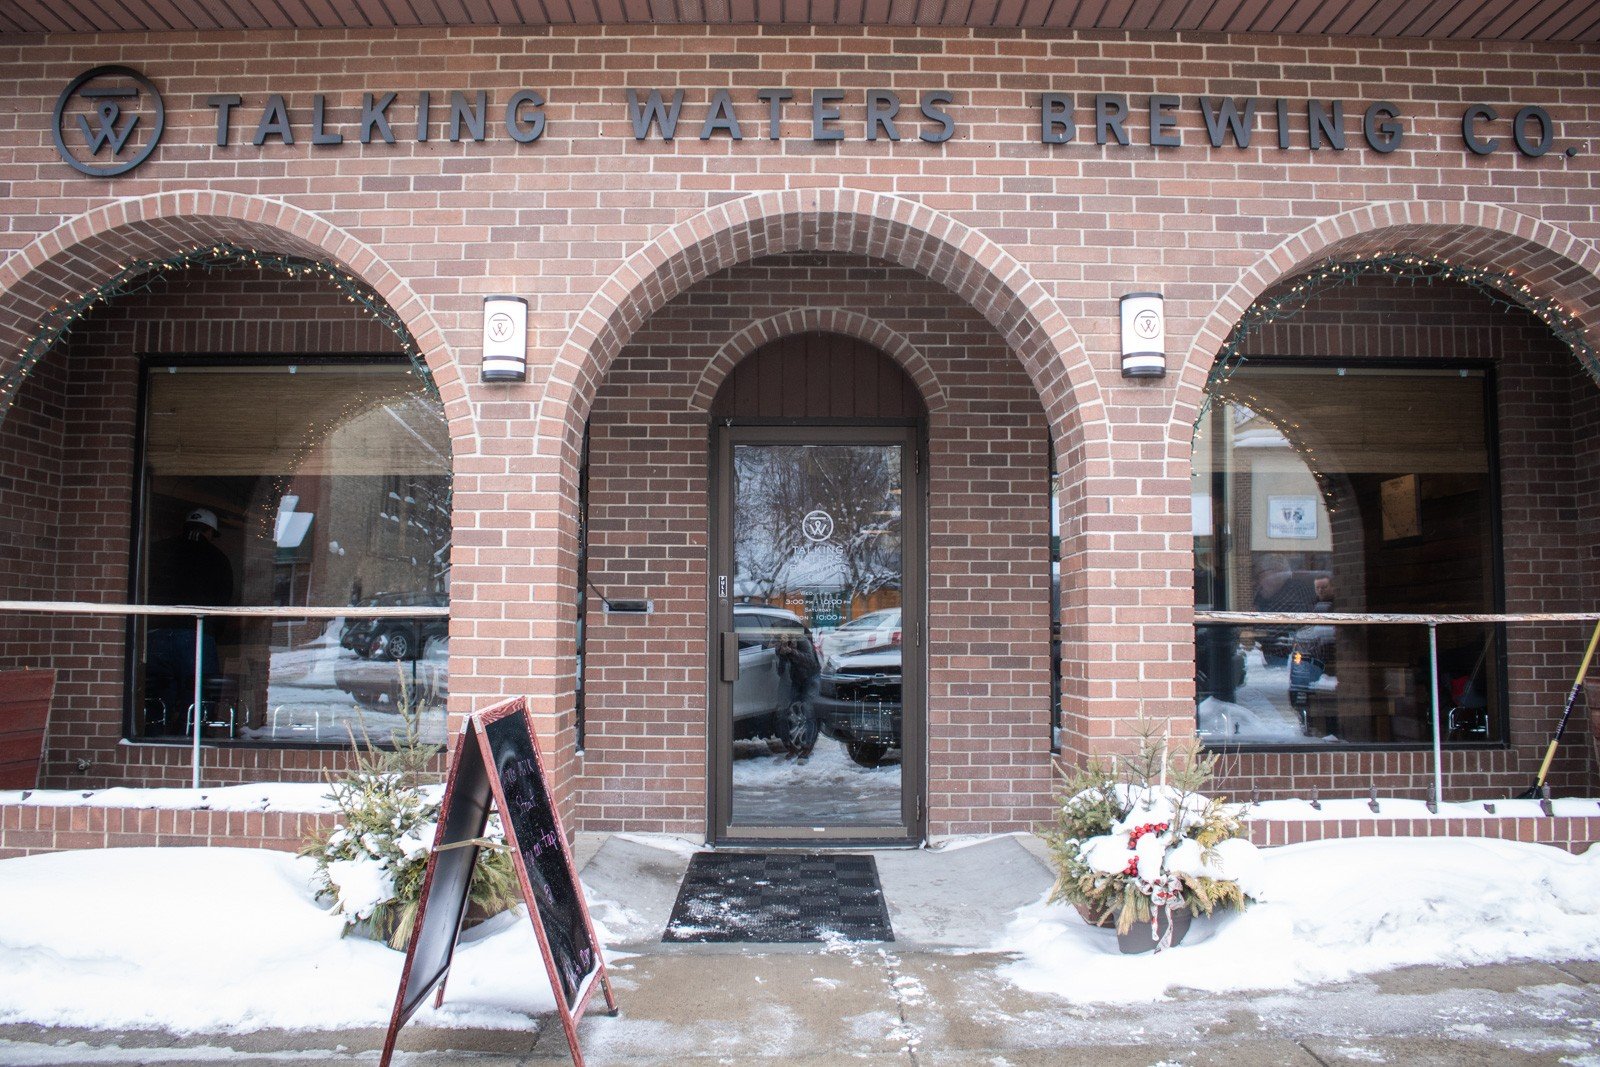 Talking Waters Brewing Company brewery from United States